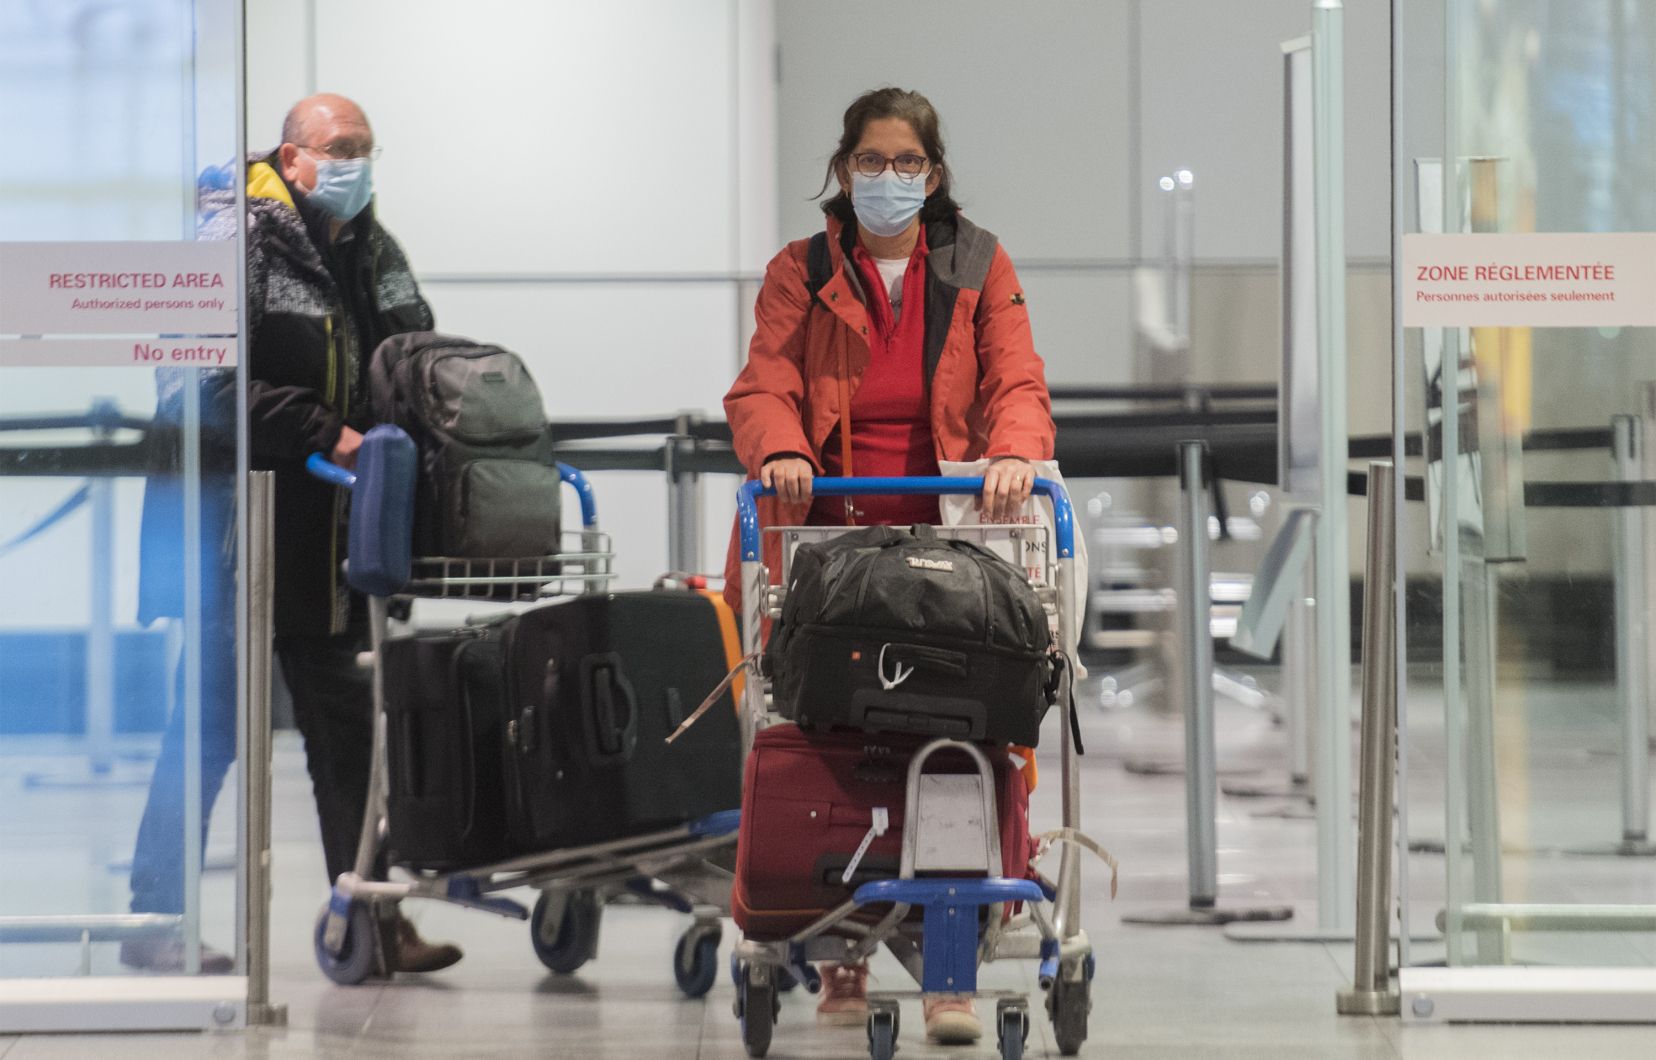 Canada welcomes fully vaccinated American travelers starting at midnight

